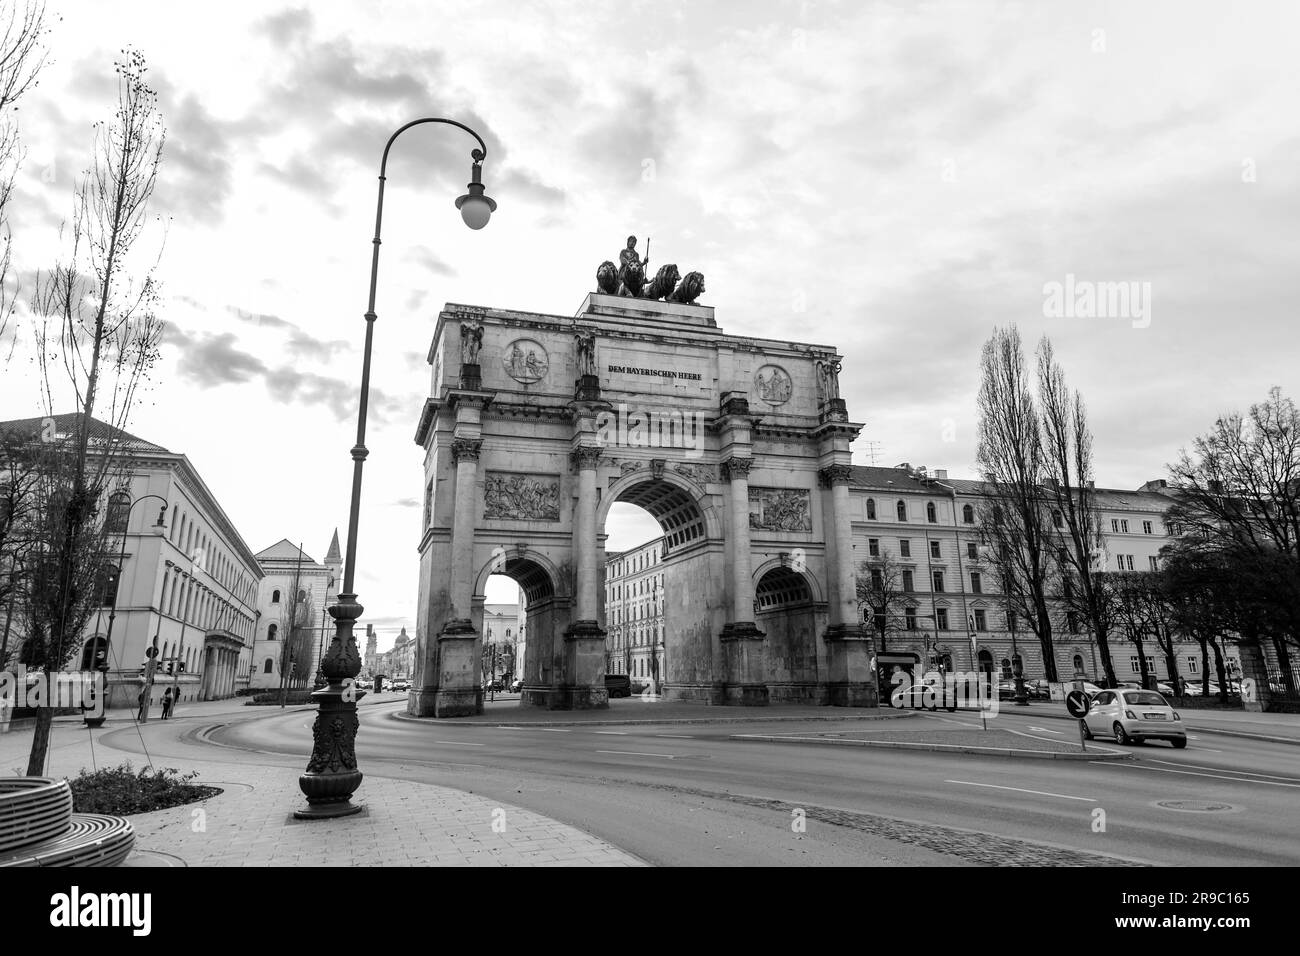 Munich, Germany - December 23, 2021: The Siegestor, The Victory Gate in Munich is a three arched memorial arch, crowned with a statue of Bavaria with Stock Photo